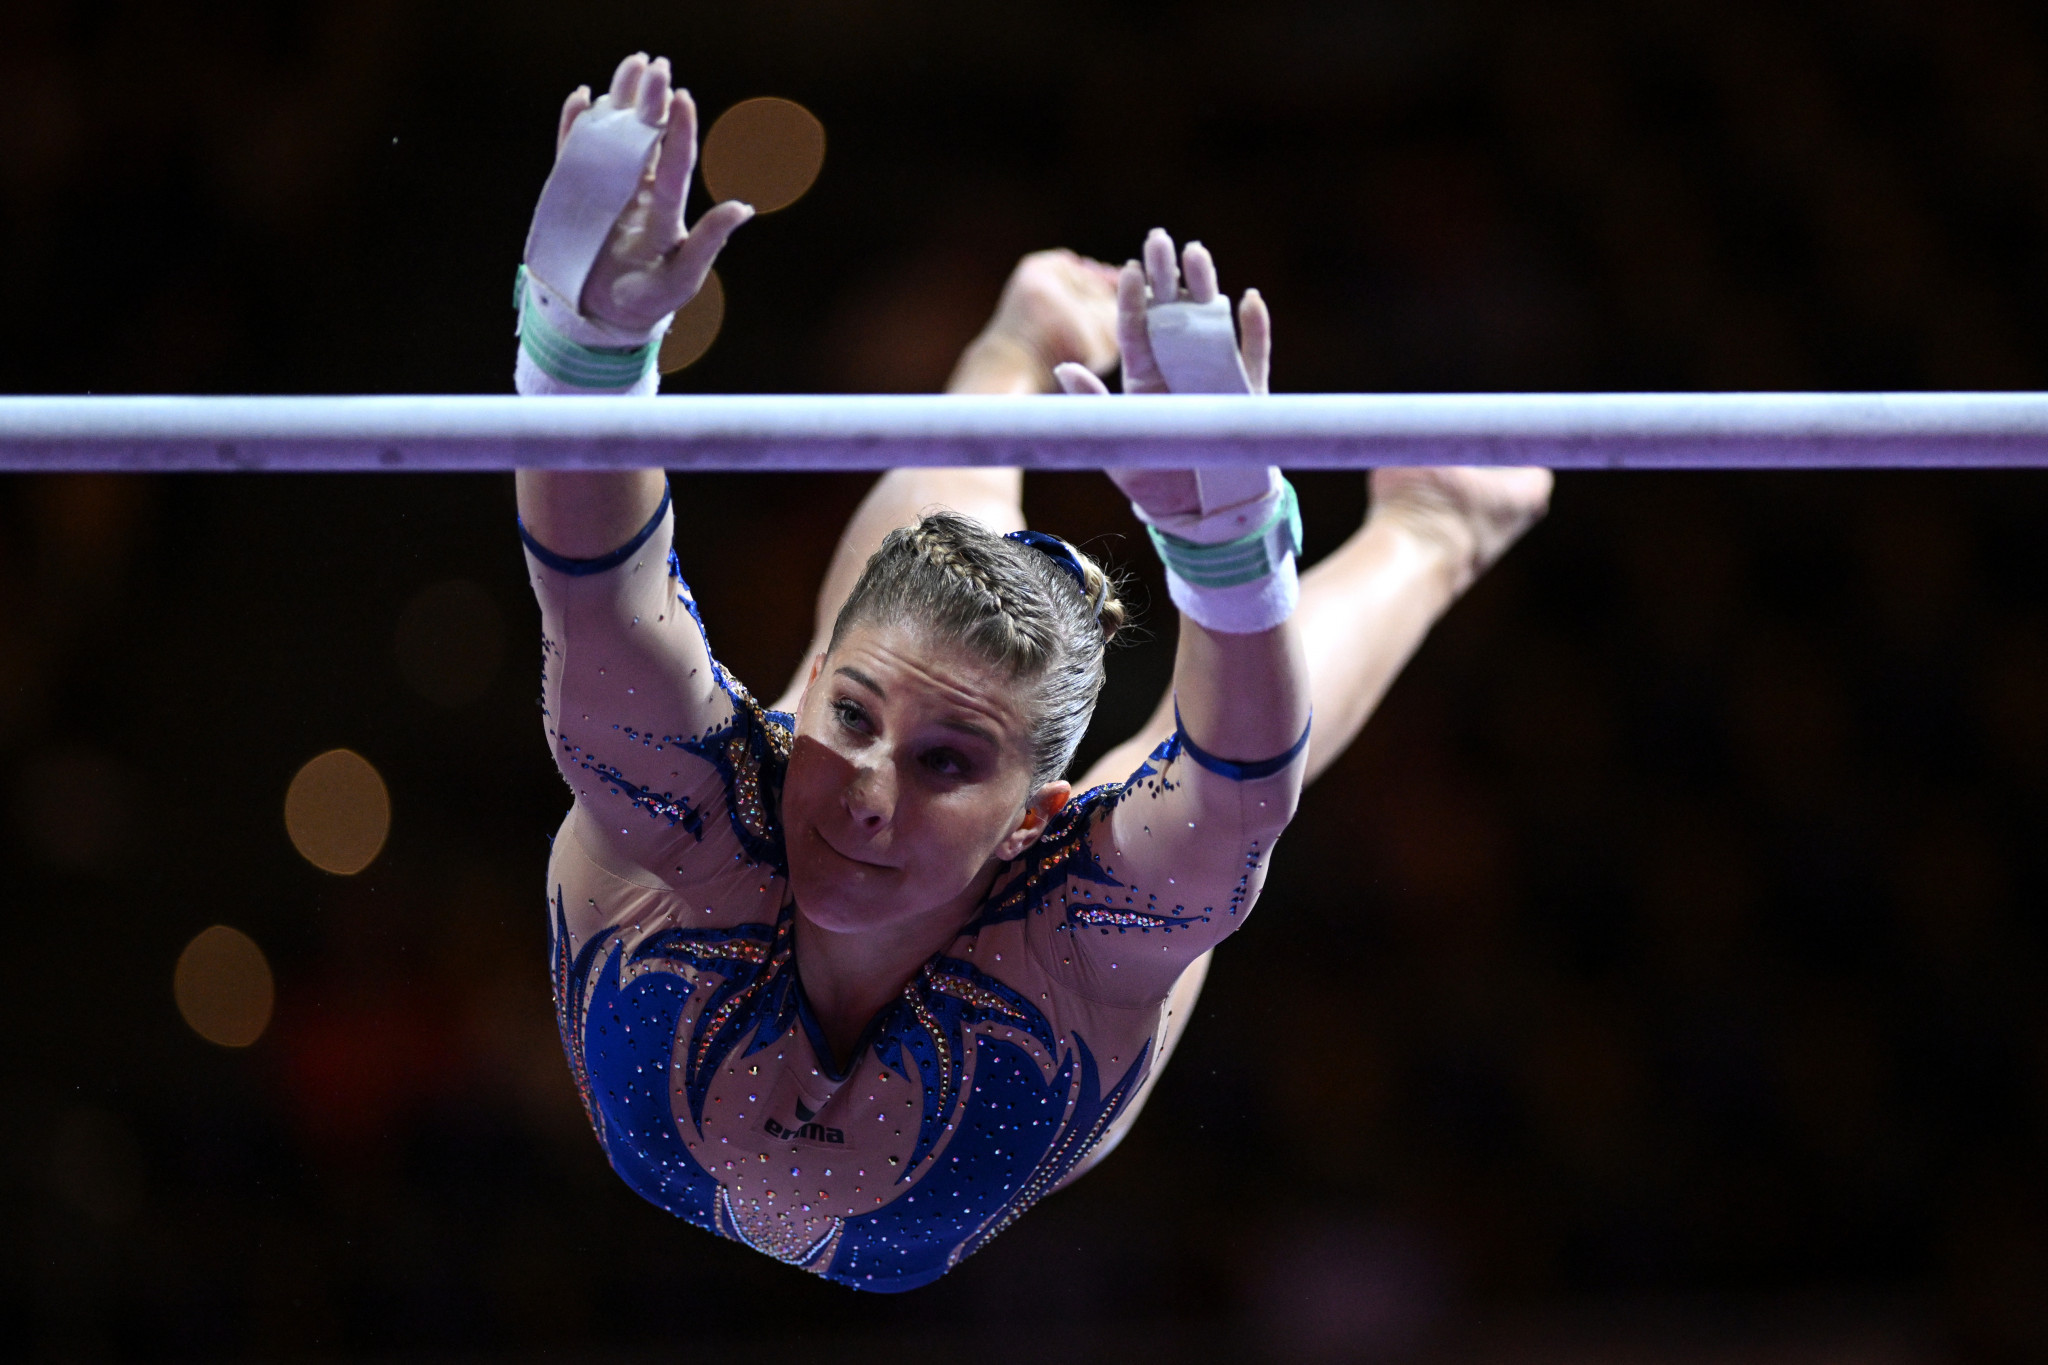 Elisabeth Seitz was one of two winners from Germany in artistic gymnastics, claiming gold in the uneven bars ©Getty Images